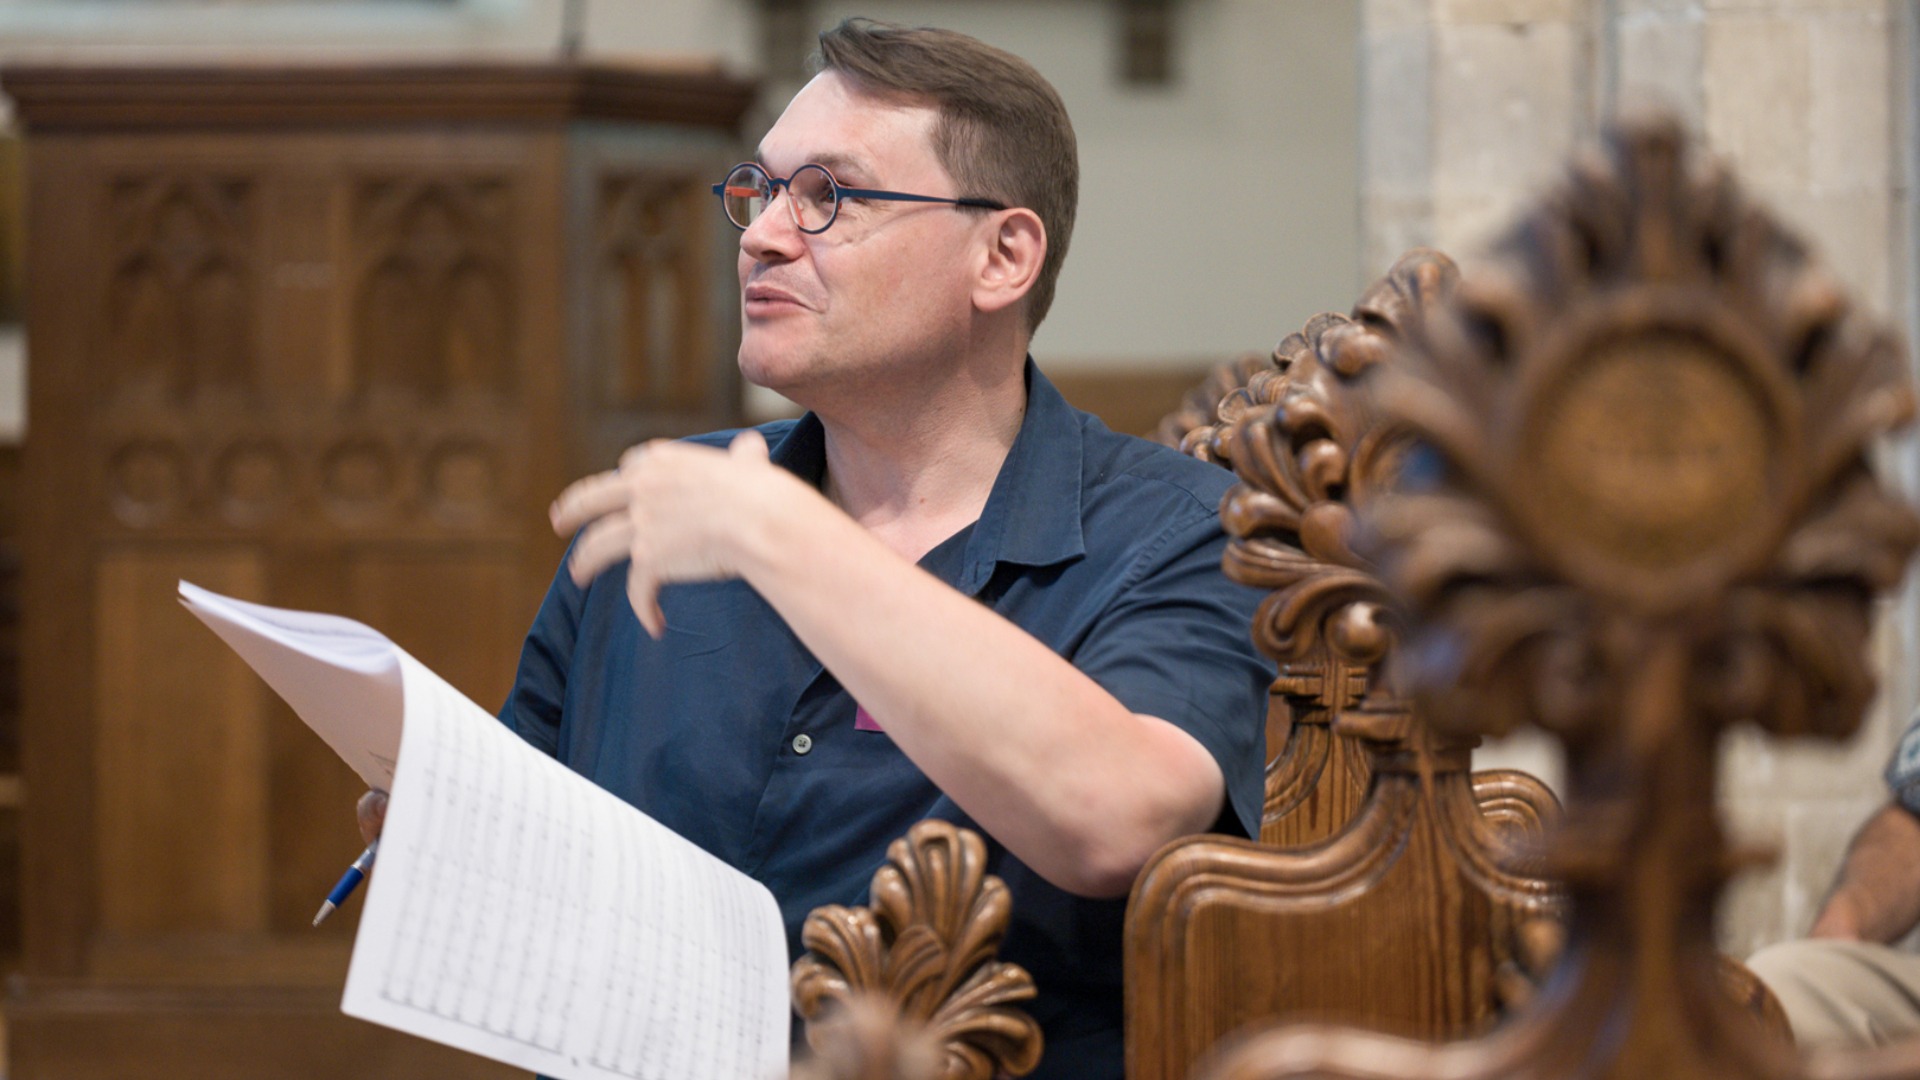 Aberdeen University composer Paul Mealor has been commissioned